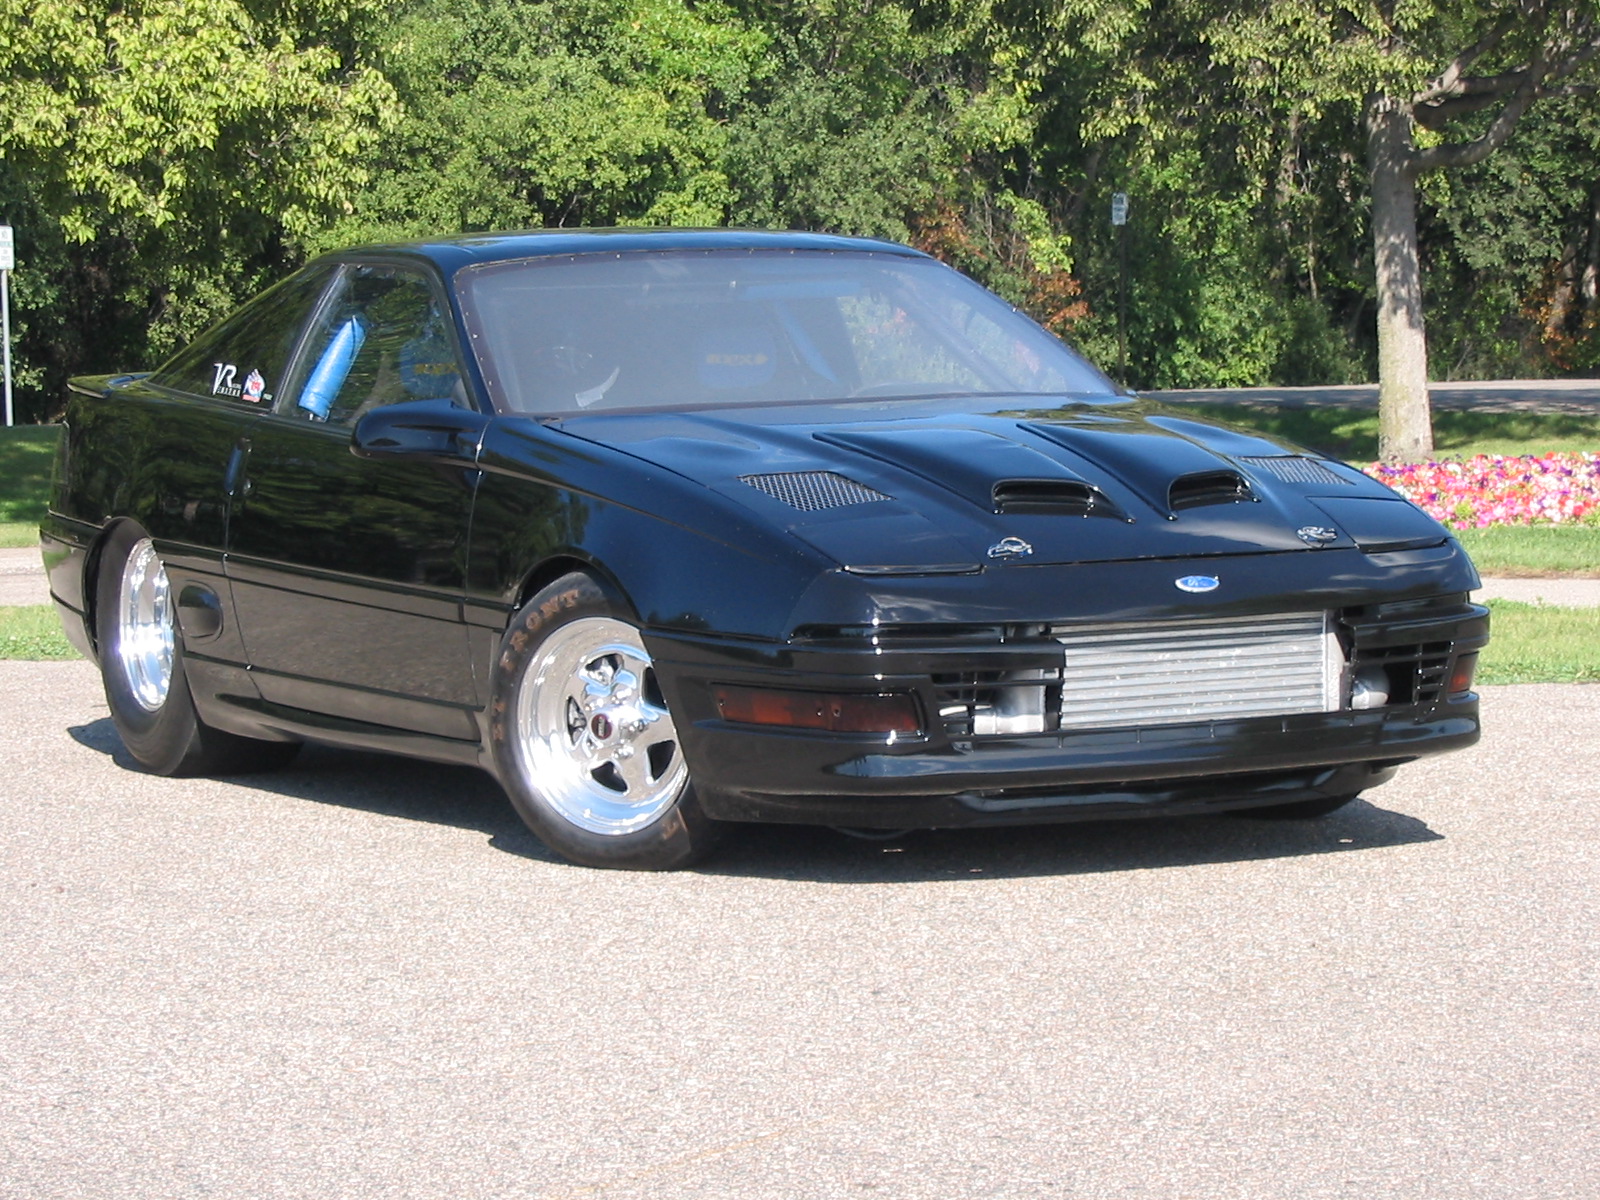 1990 Ford Probe GT Turbo, Picture of 1990 Ford Probe 2 Dr GT Turbo Hatchback